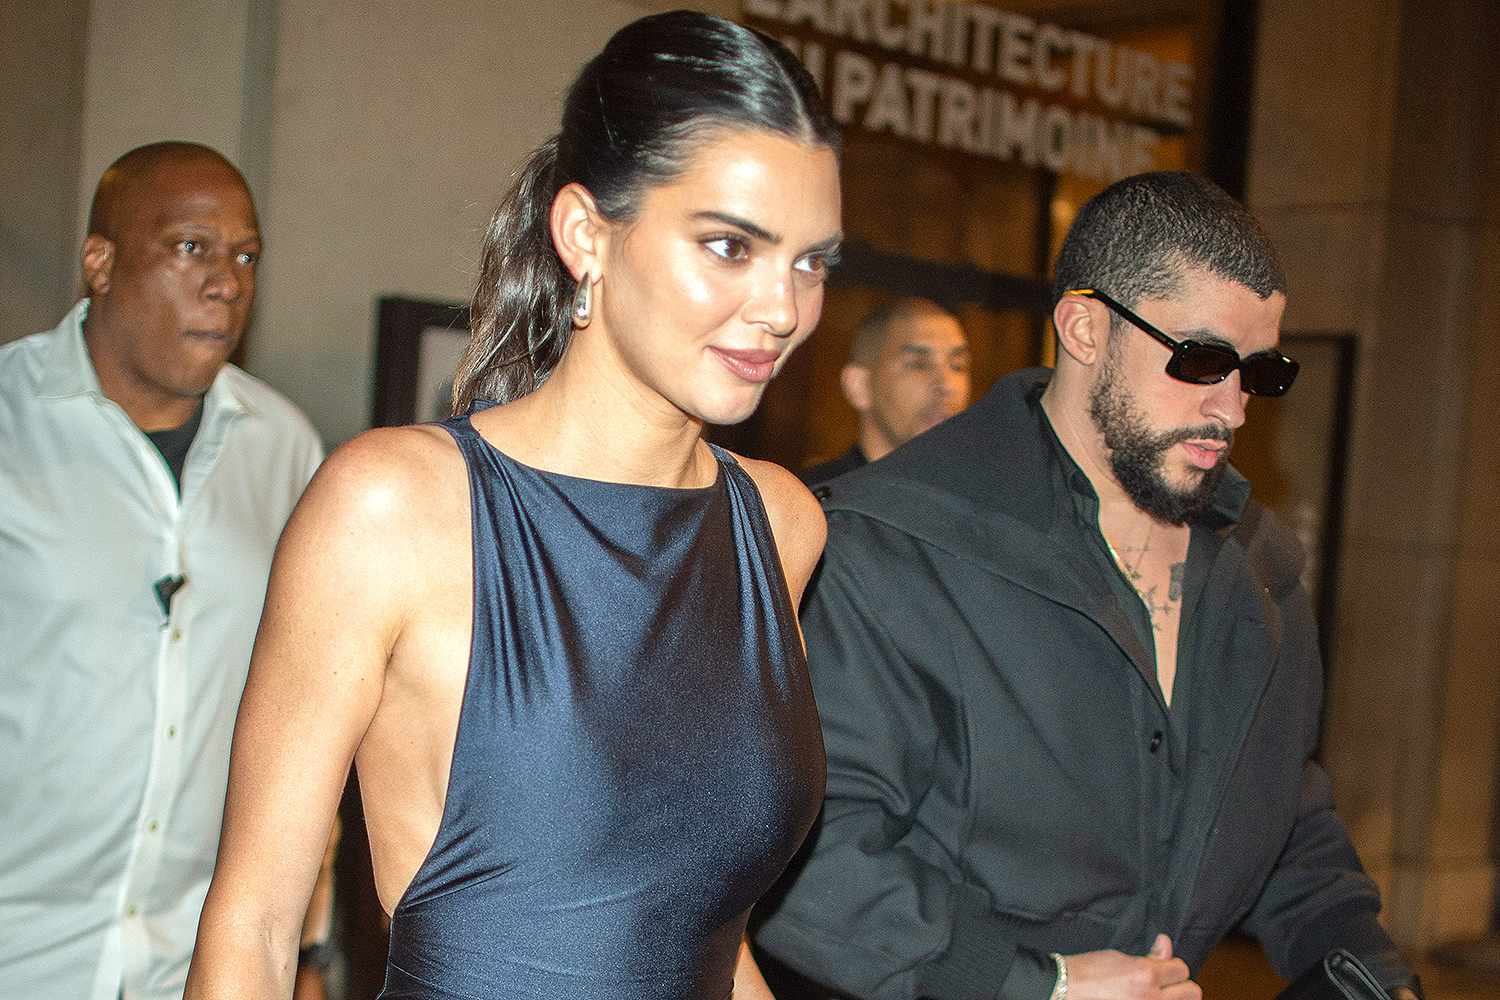 Kendall Jenner and Bad Bunny Are Both in Black as They Hold Hands During Date Night in Paris